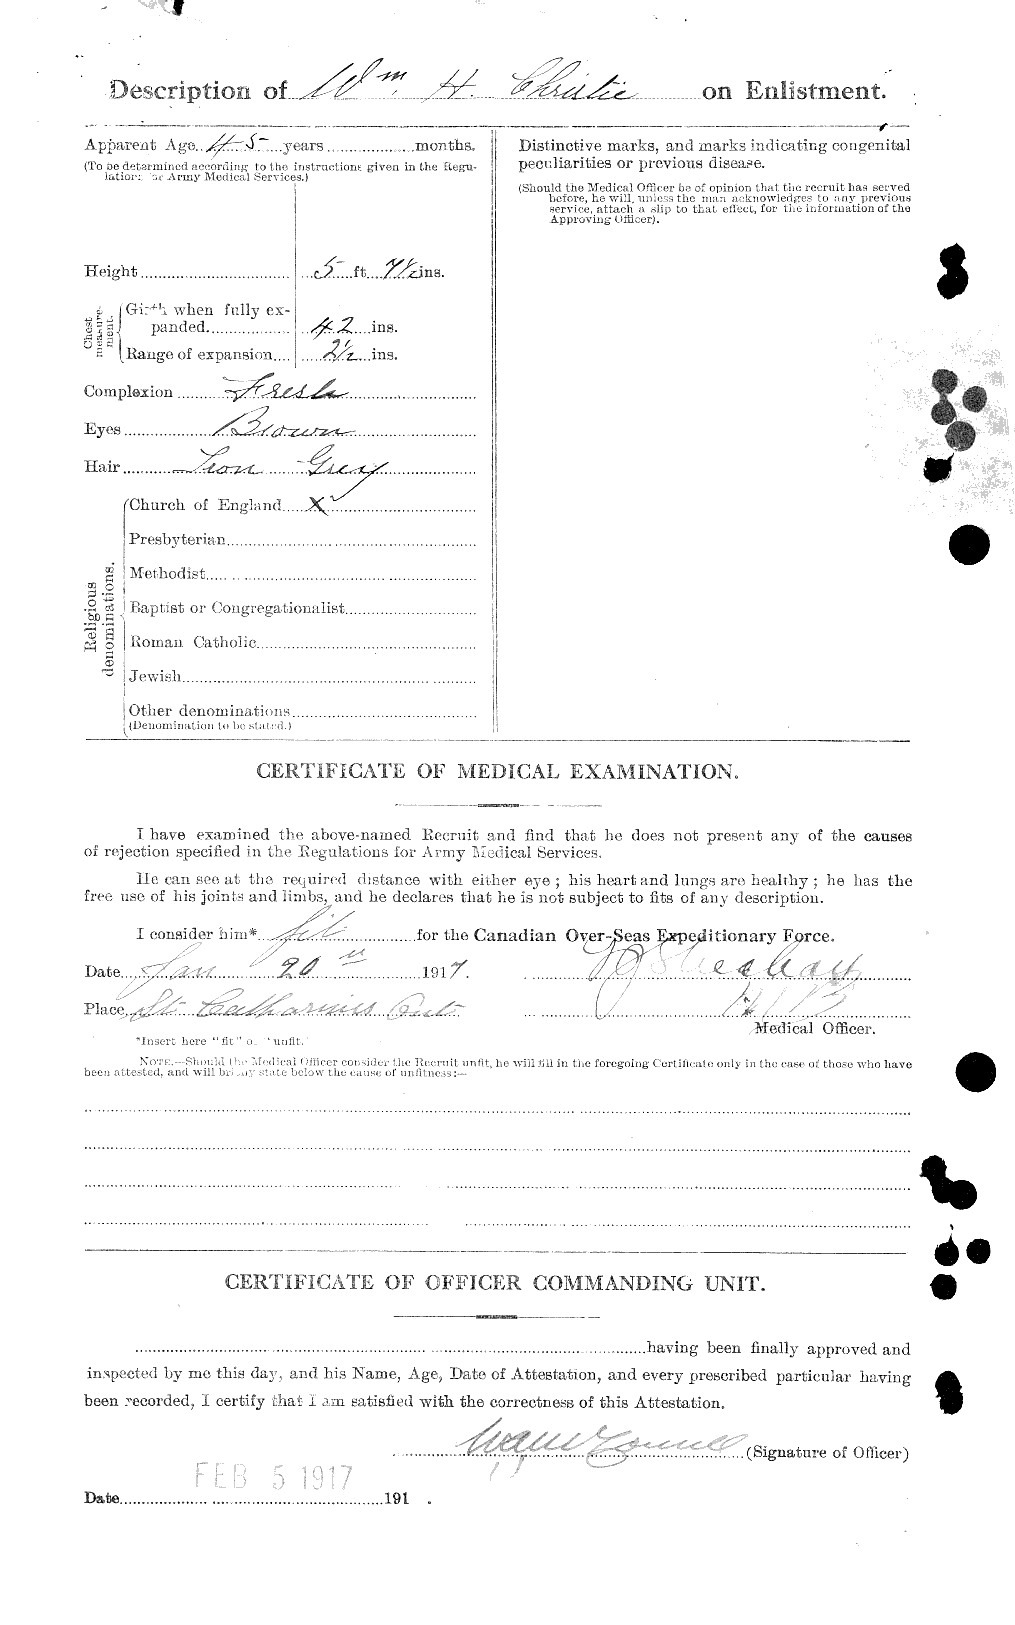 Personnel Records of the First World War - CEF 022099b